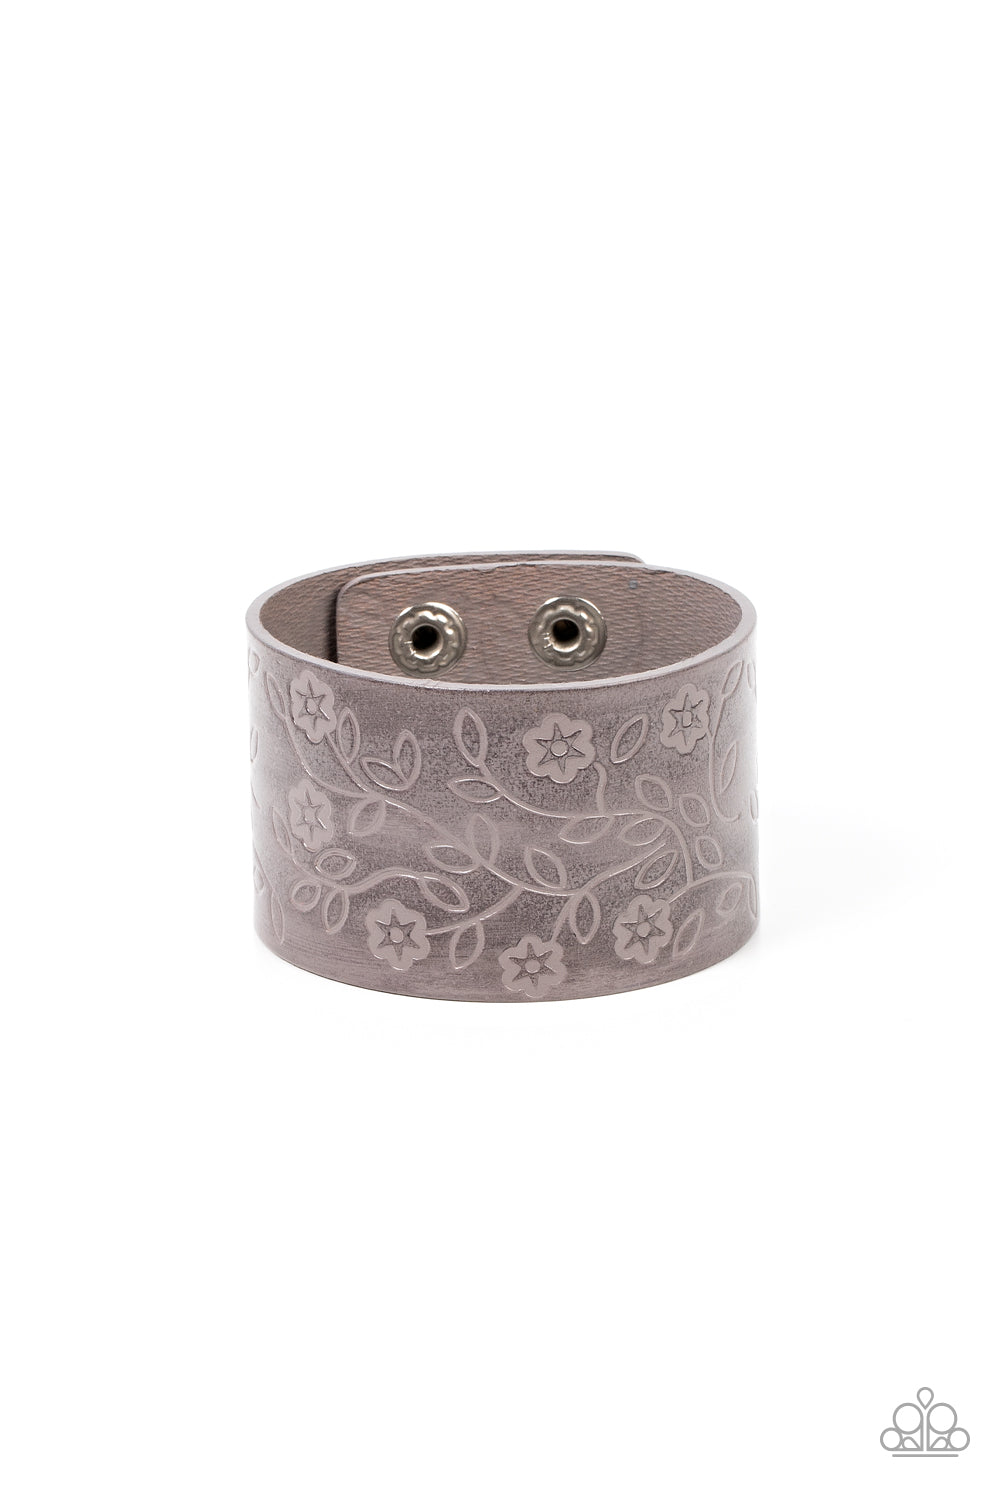 Rosy Wrap Up Silver Wrap Bracelet - Paparazzi Accessories  A flowery and leafy motif blooms across the front of a distressed gray leather band, resulting in a rustic floral centerpiece around the wrist. Features an adjustable snap closure.  Sold as one individual bracelet.